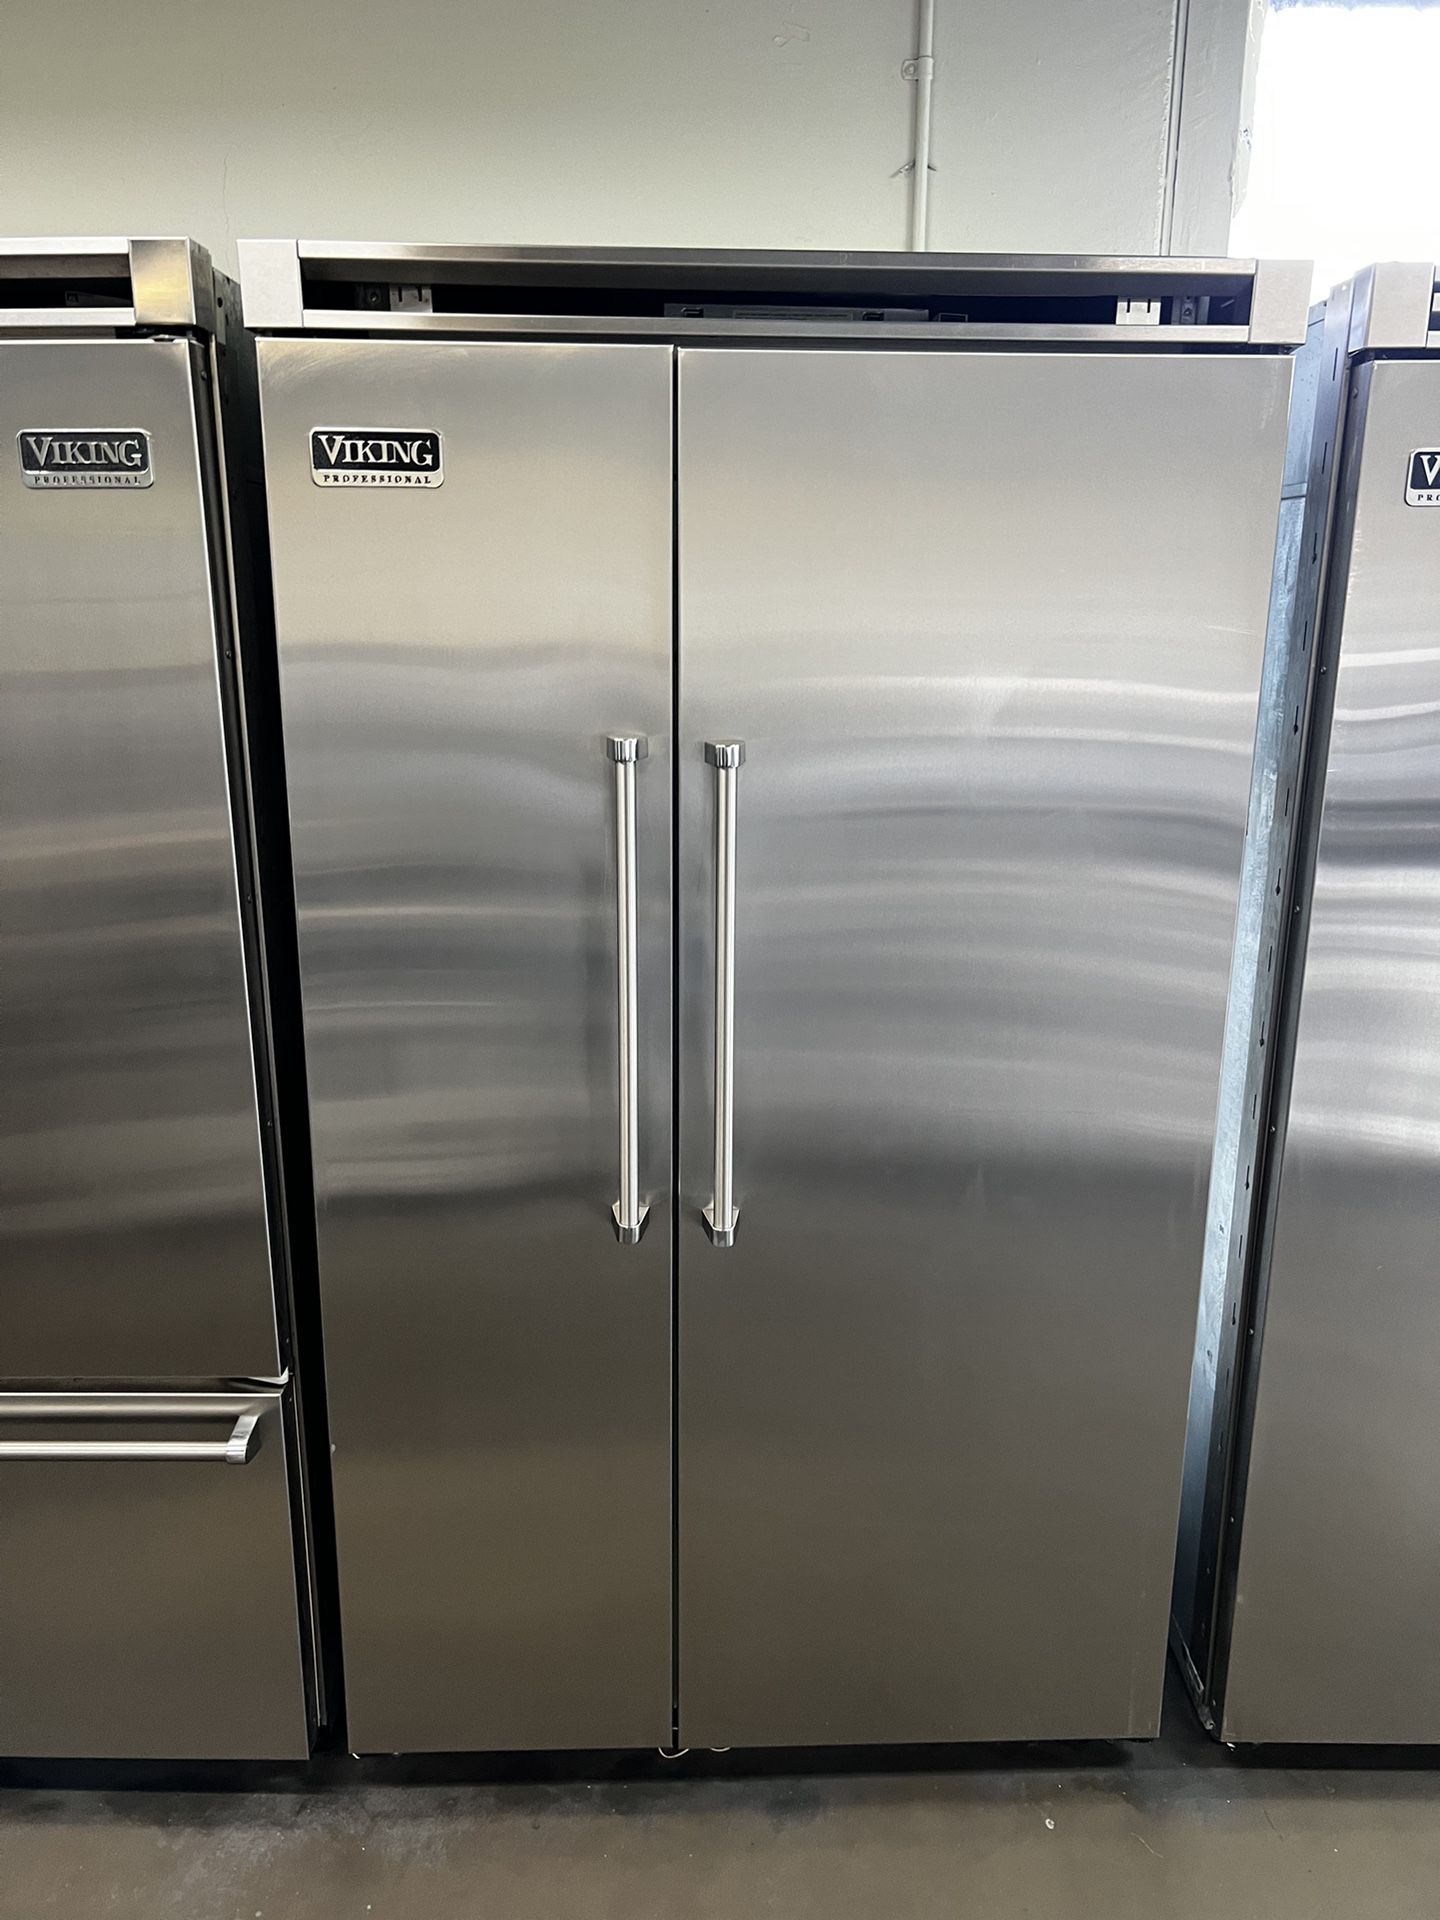 Viking 48”Wide Stainless Steel Side By Side Refrigerator Built In 